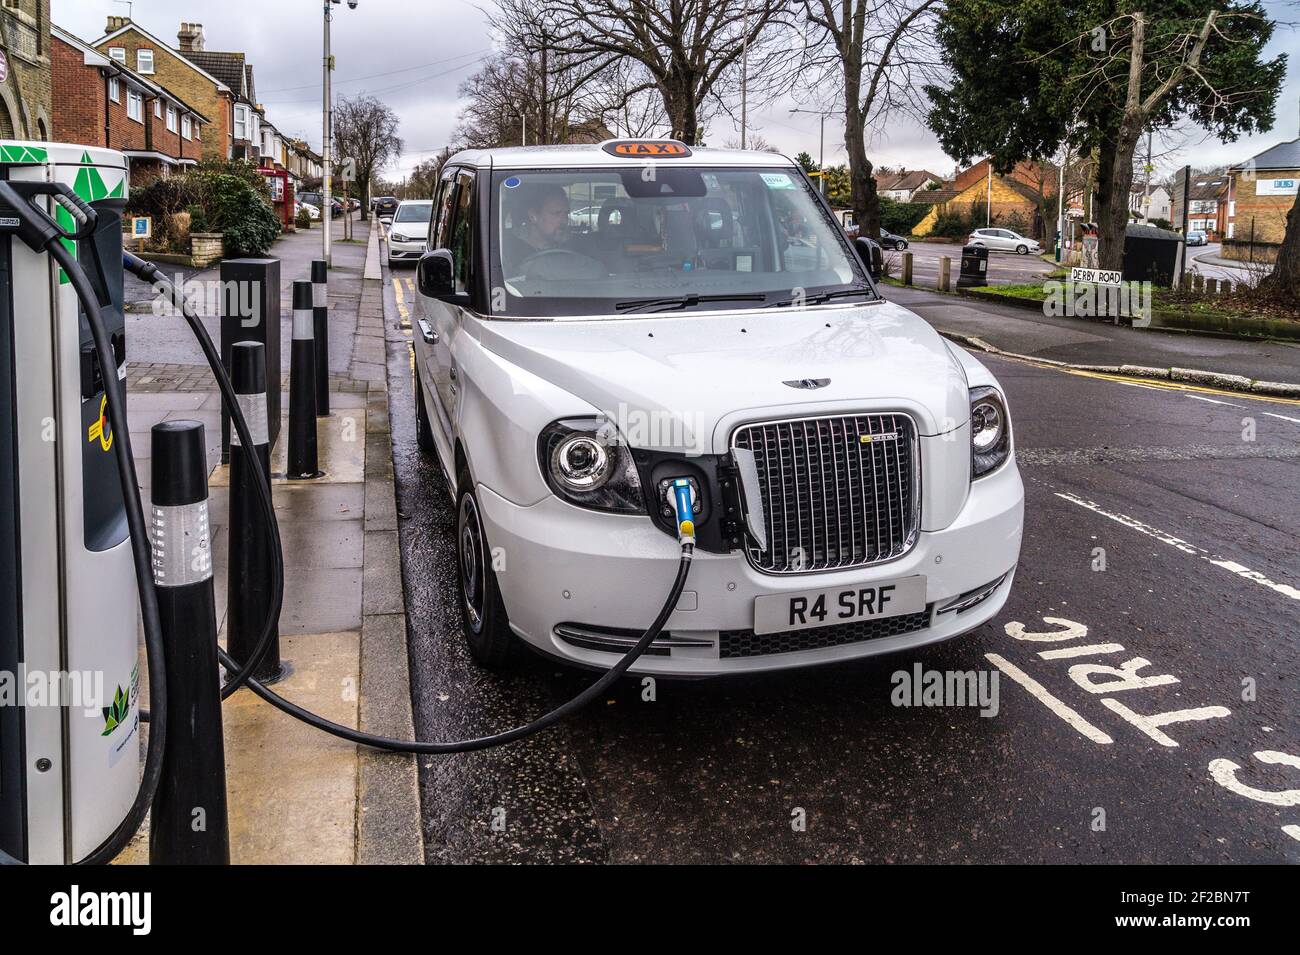 Taxi White LEVC TX branché dans une station de charge Chargemaster, South Woodford, Londres E18, Angleterre Banque D'Images